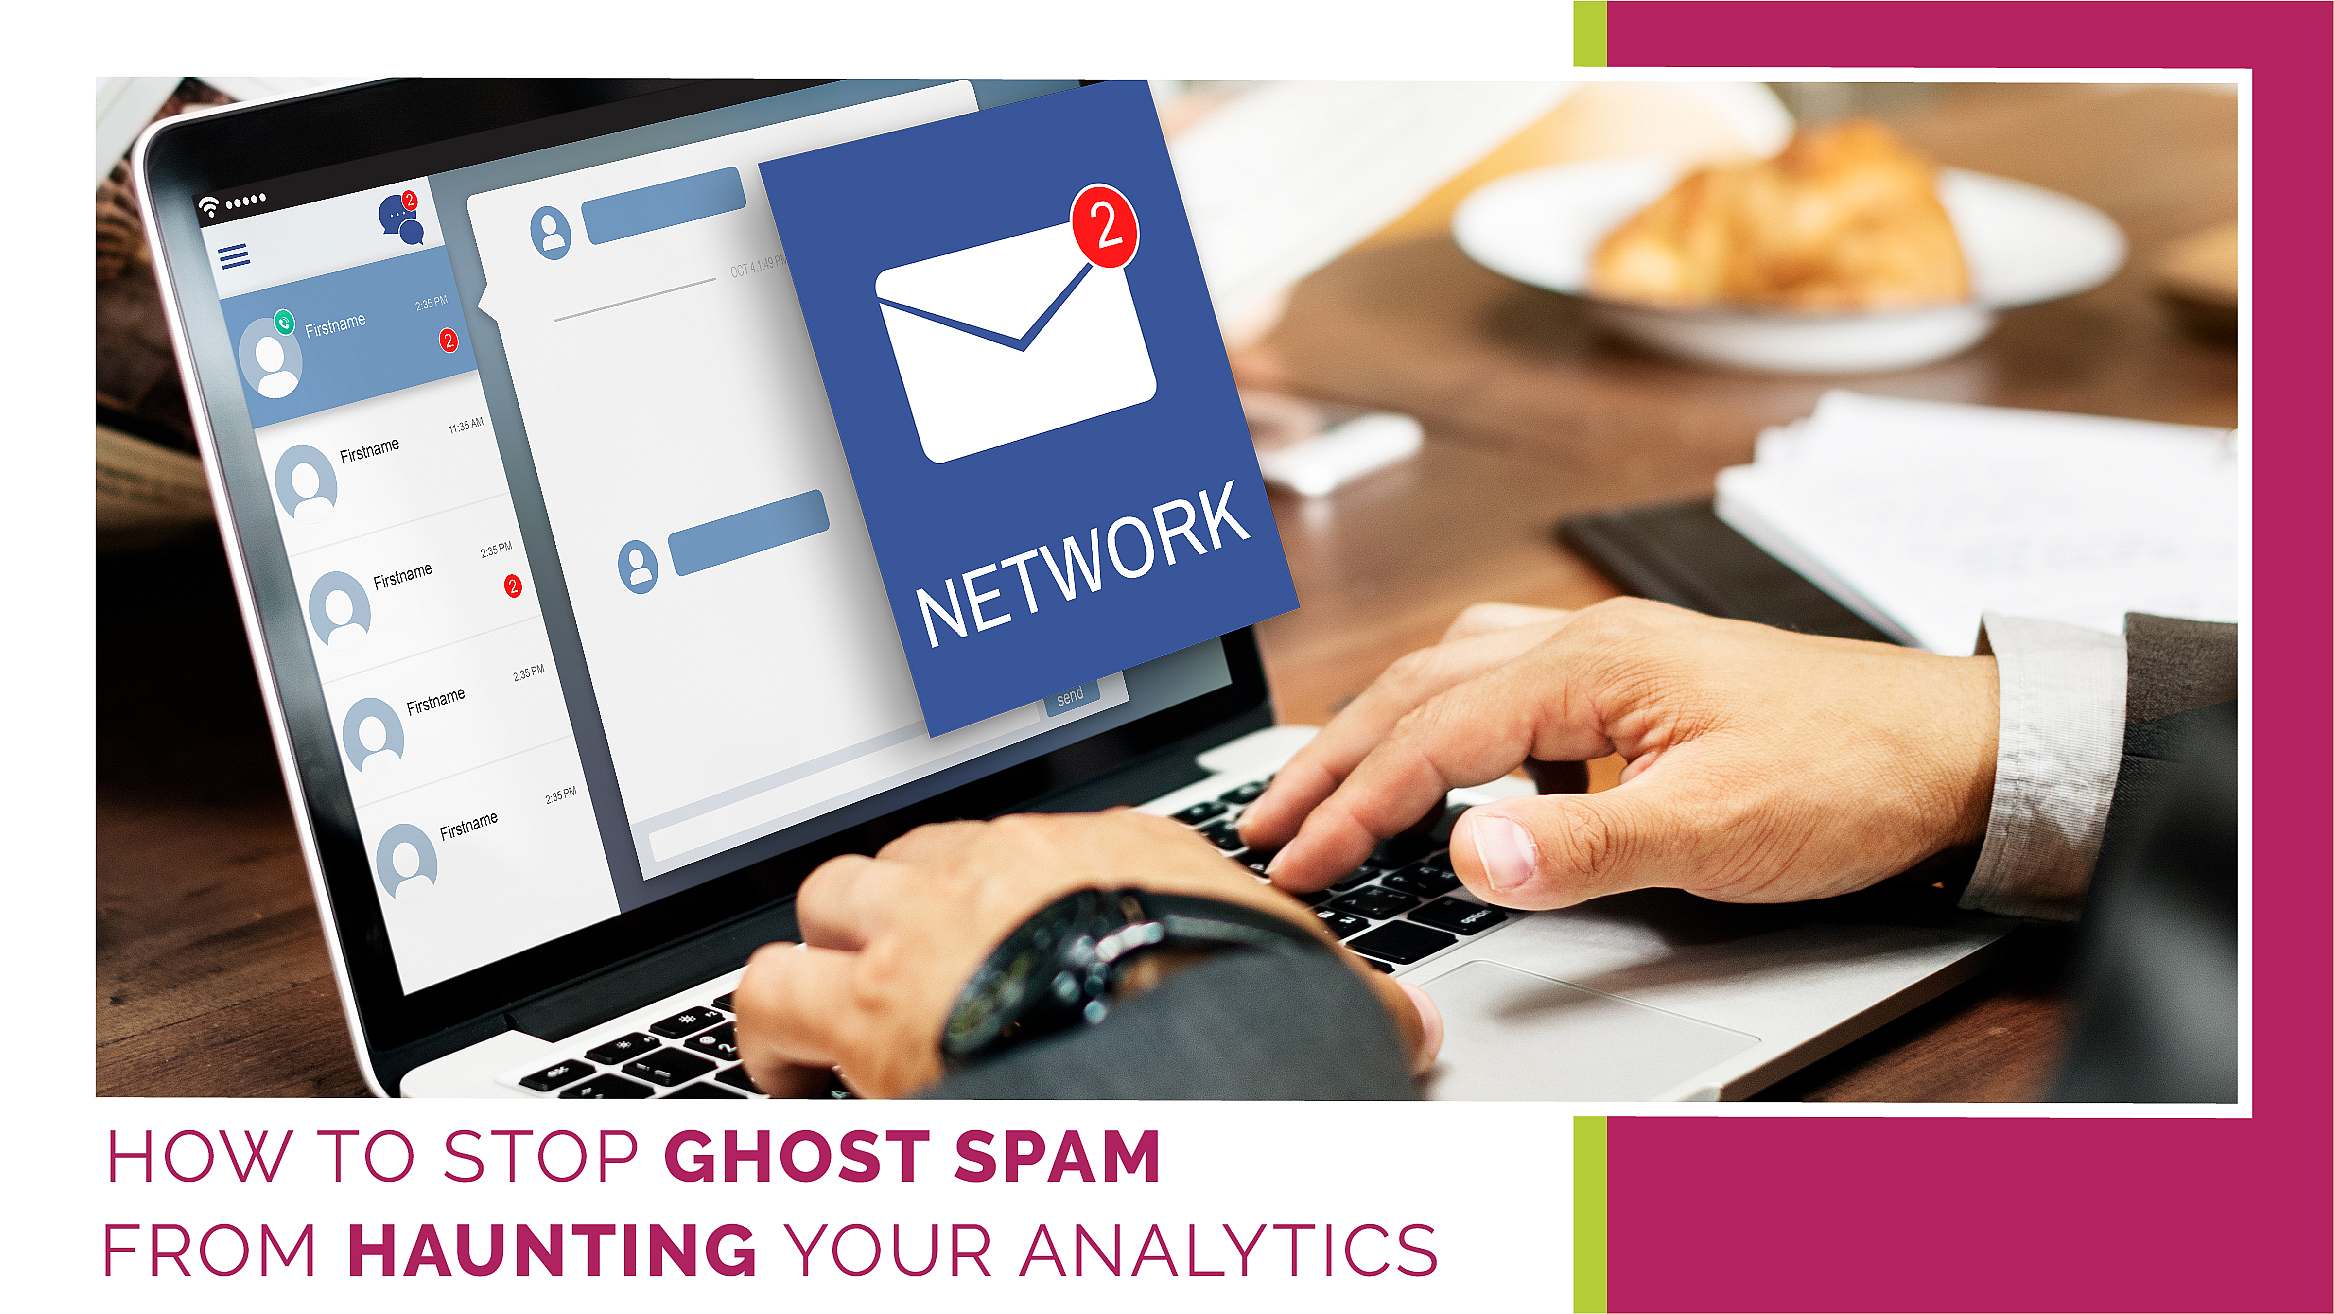 How to Stop Ghost Spam from Haunting Your Analytics